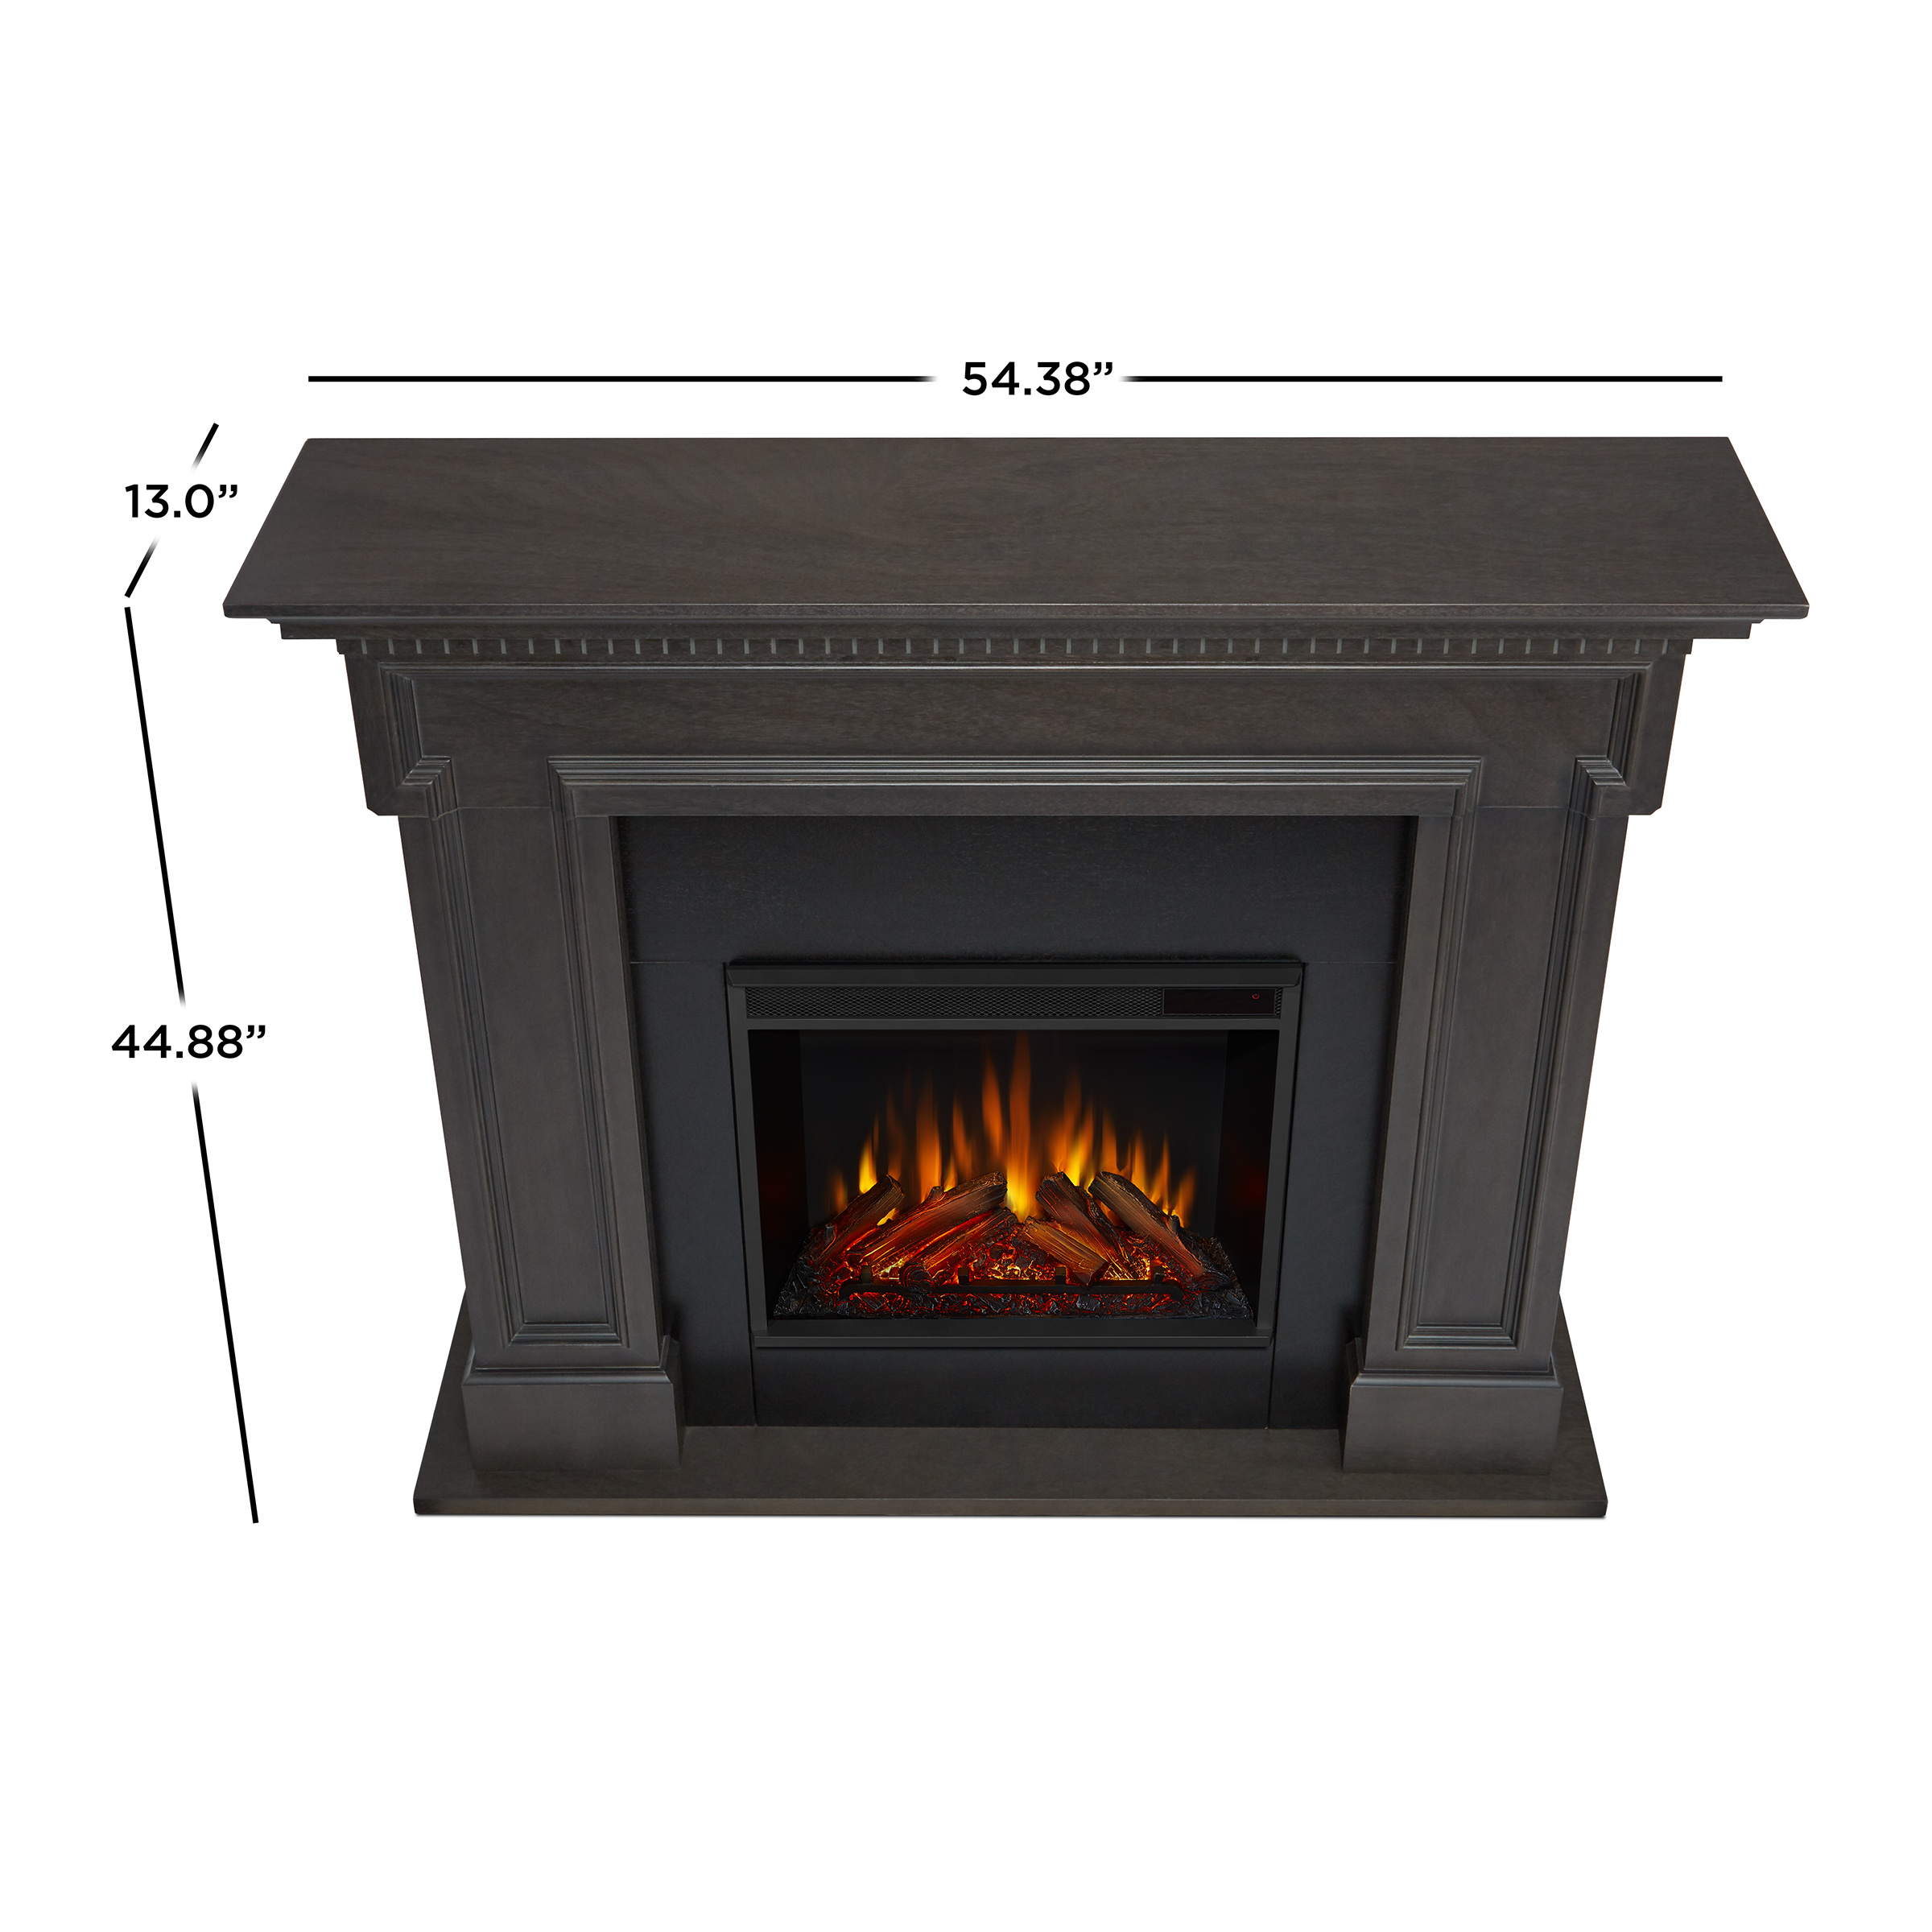 Gray Electric Fireplace Dimensions